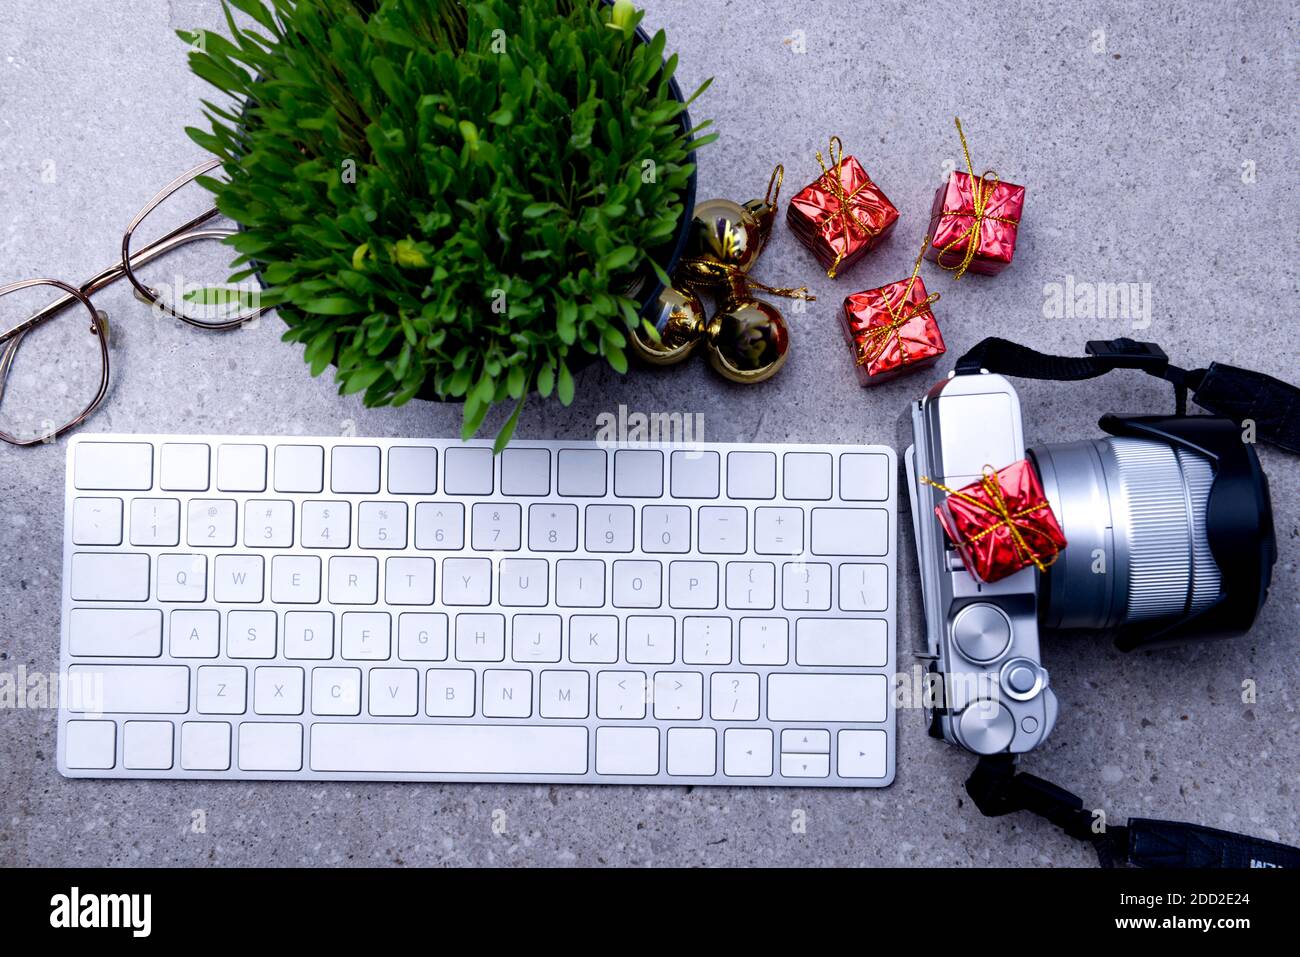 Close up view of millet grass plant in the pot with Christmas decoration, camera, and the keyboard on the desk Stock Photo